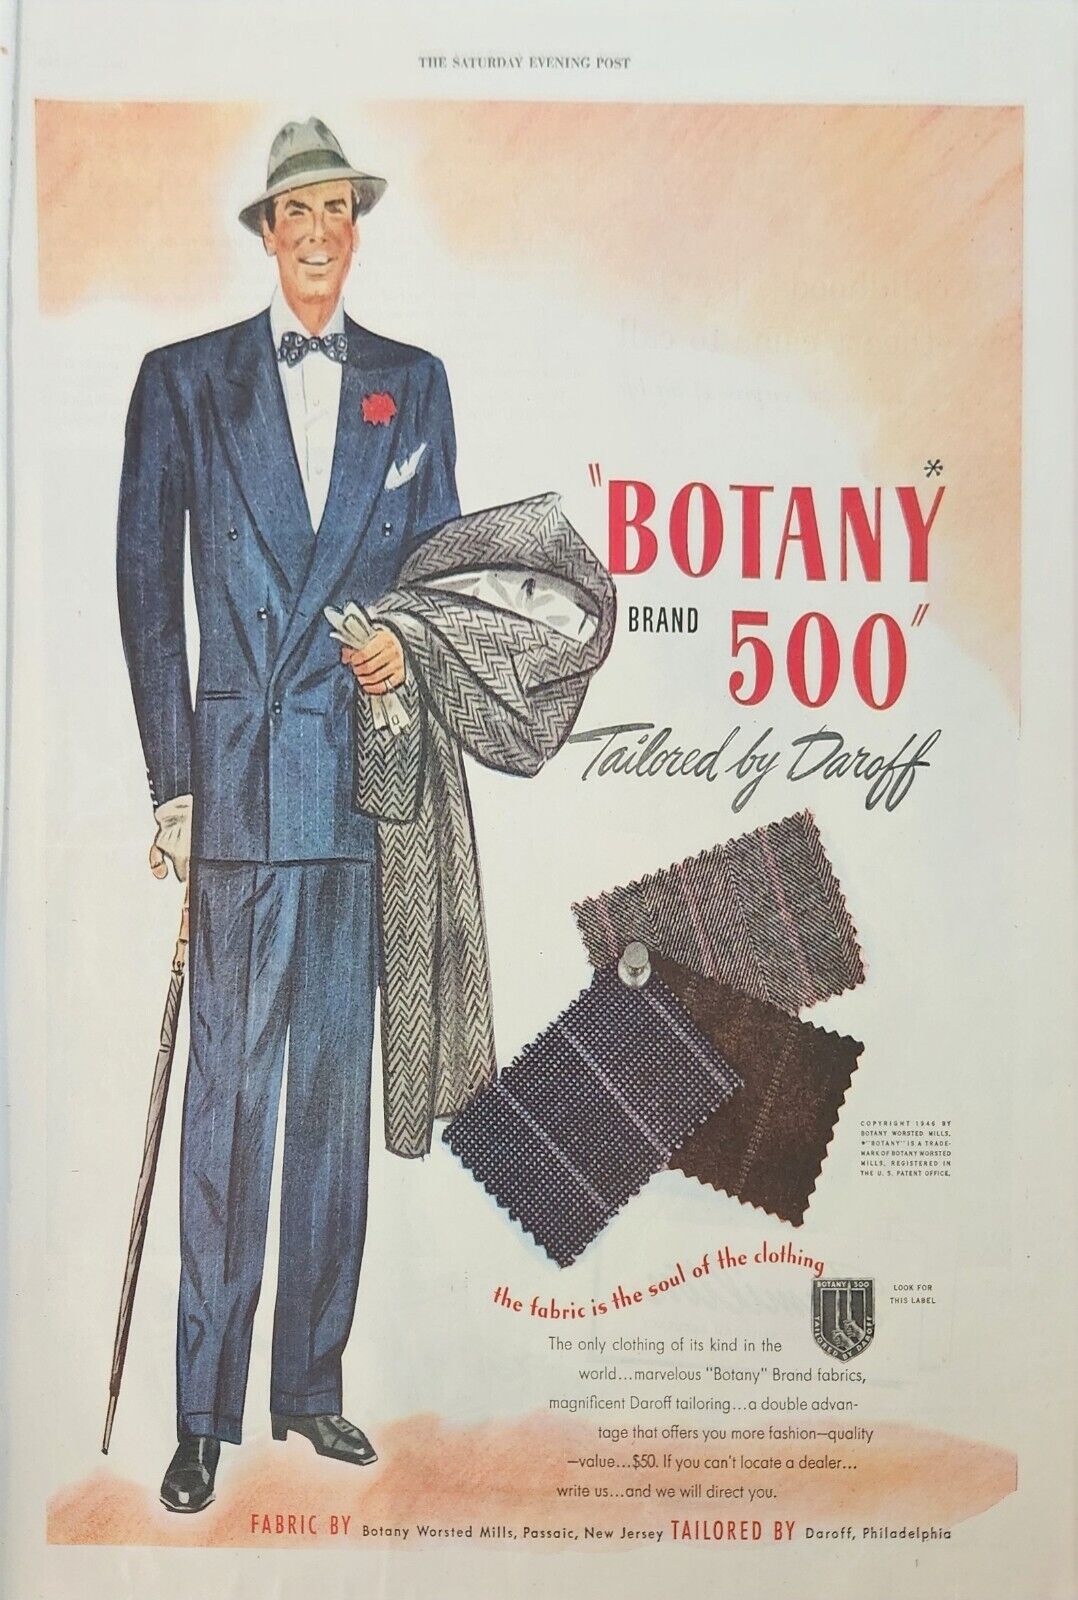 1946 Botany 500 men's suits Vintage Ad fabric is the soul of the clothing